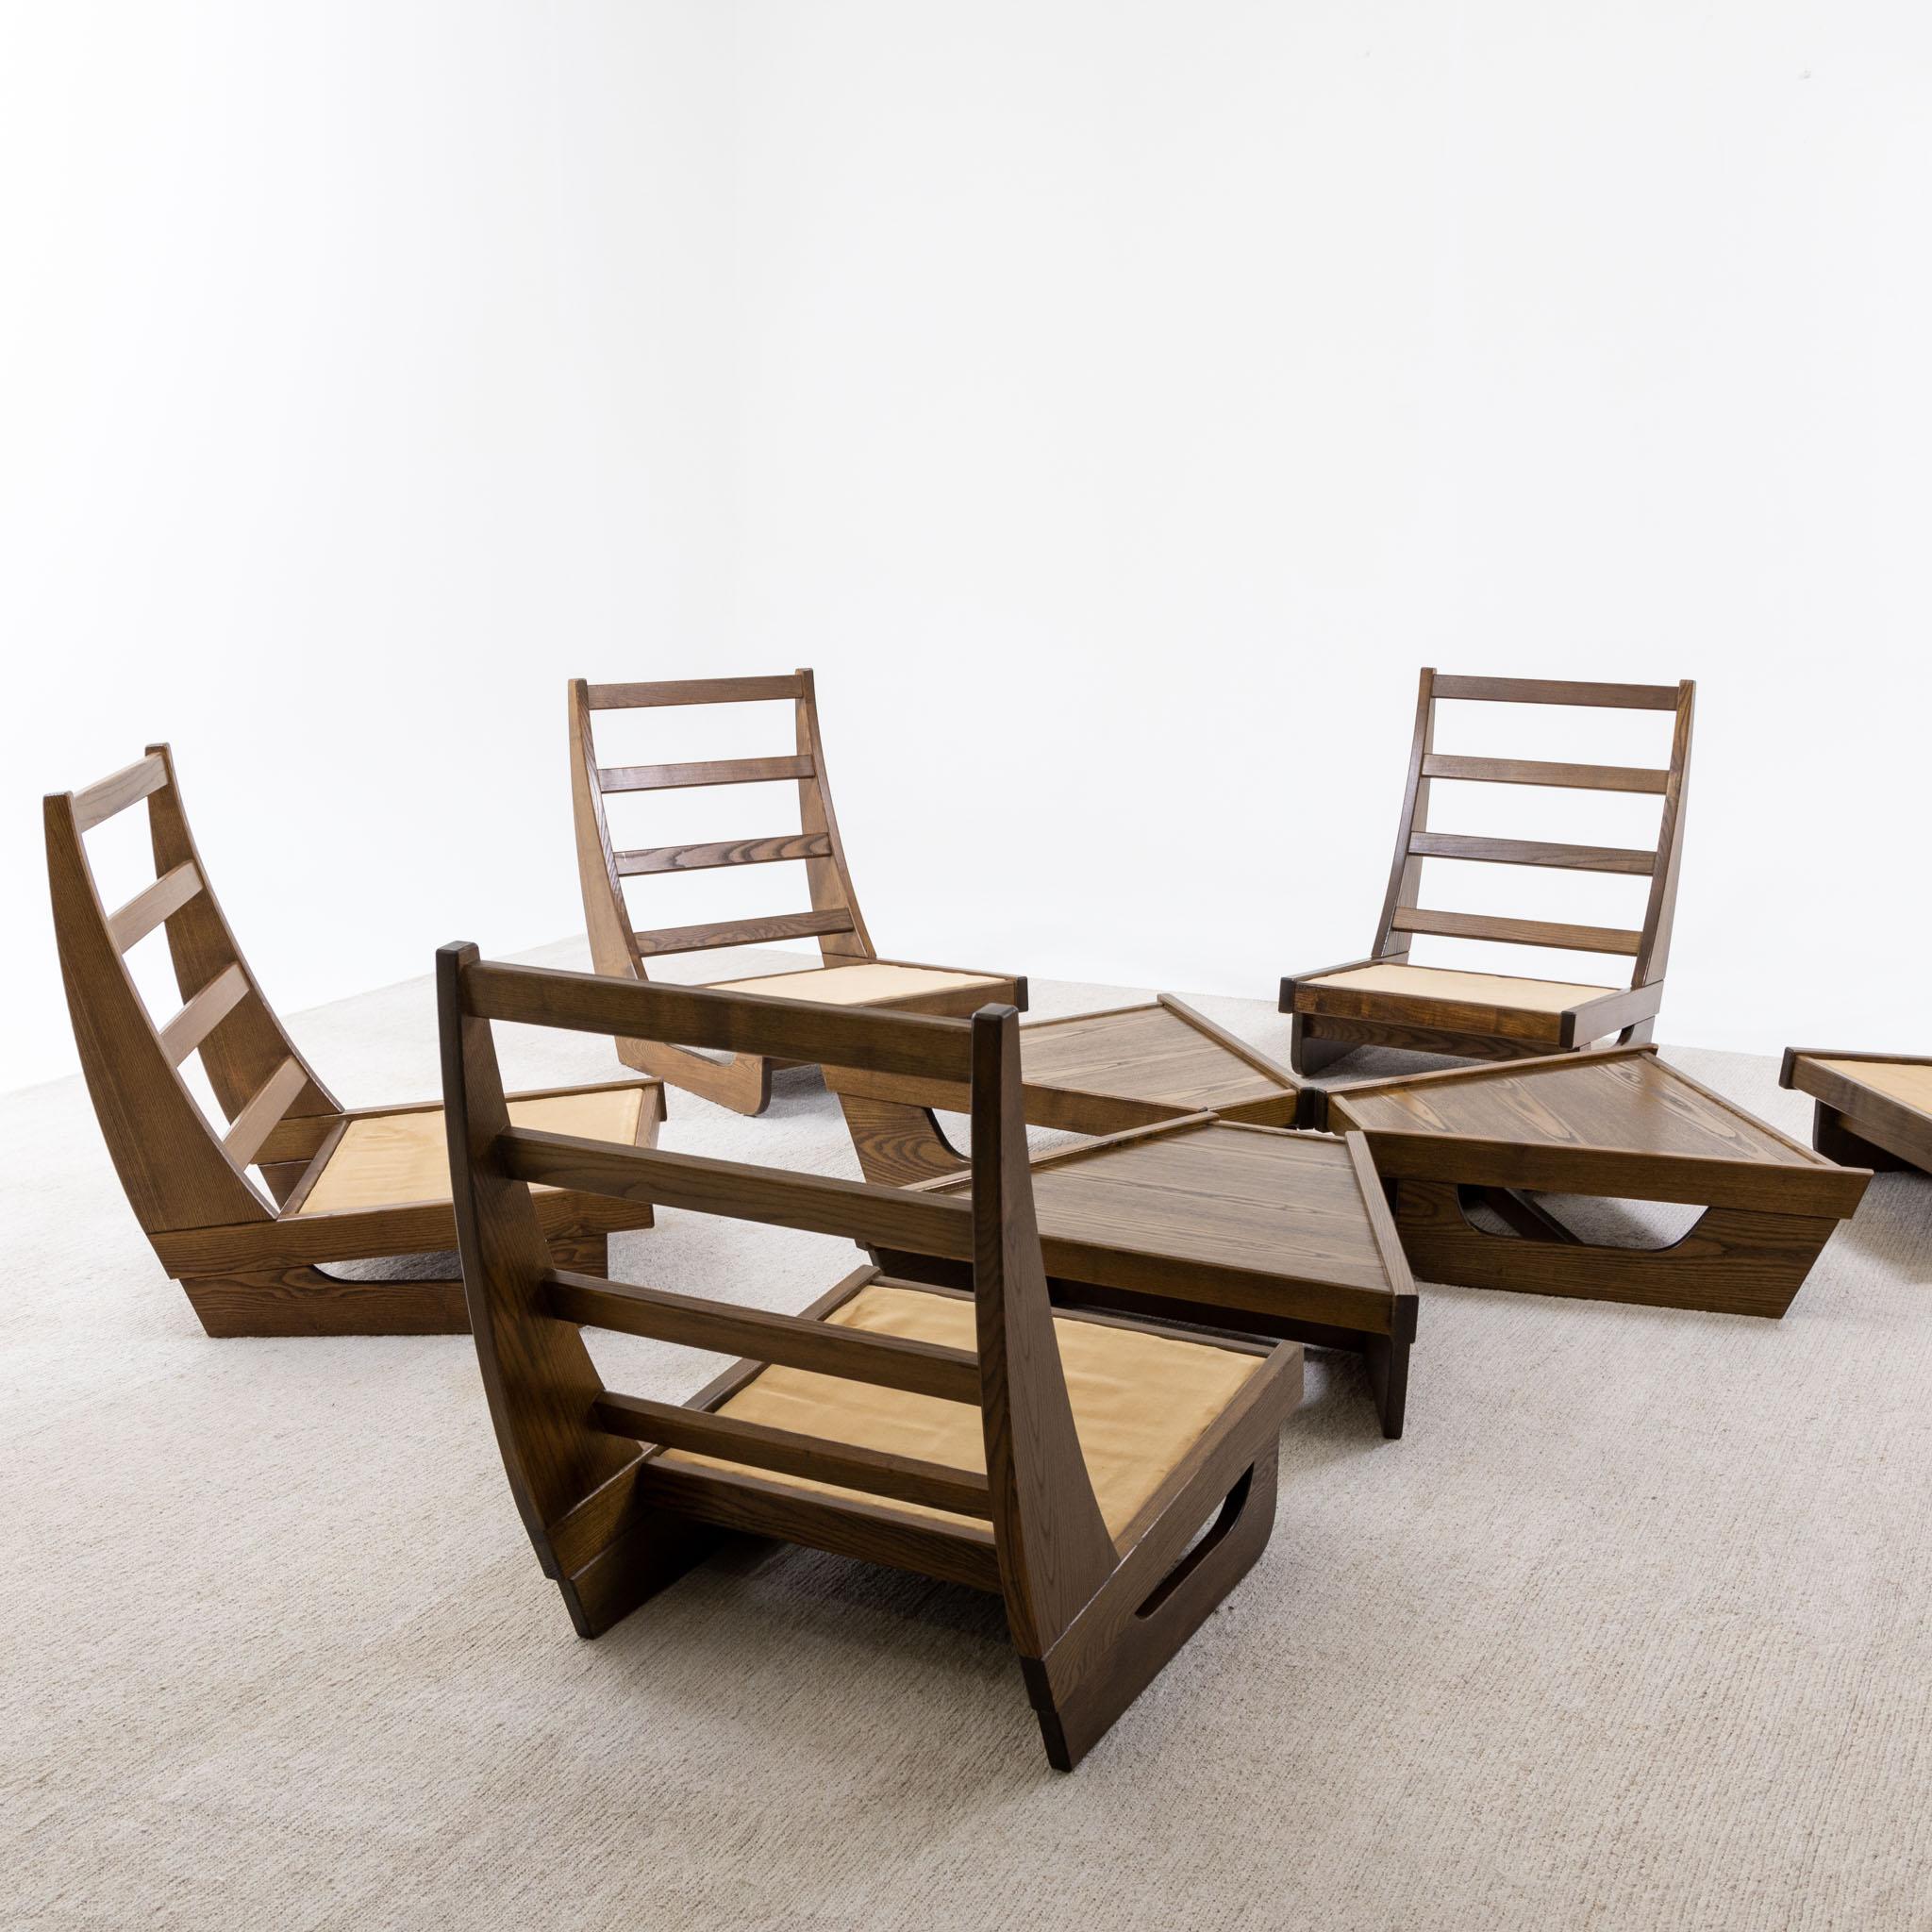 Modular Seating Group with five Lounge Chairs, Italy 1950s For Sale 10